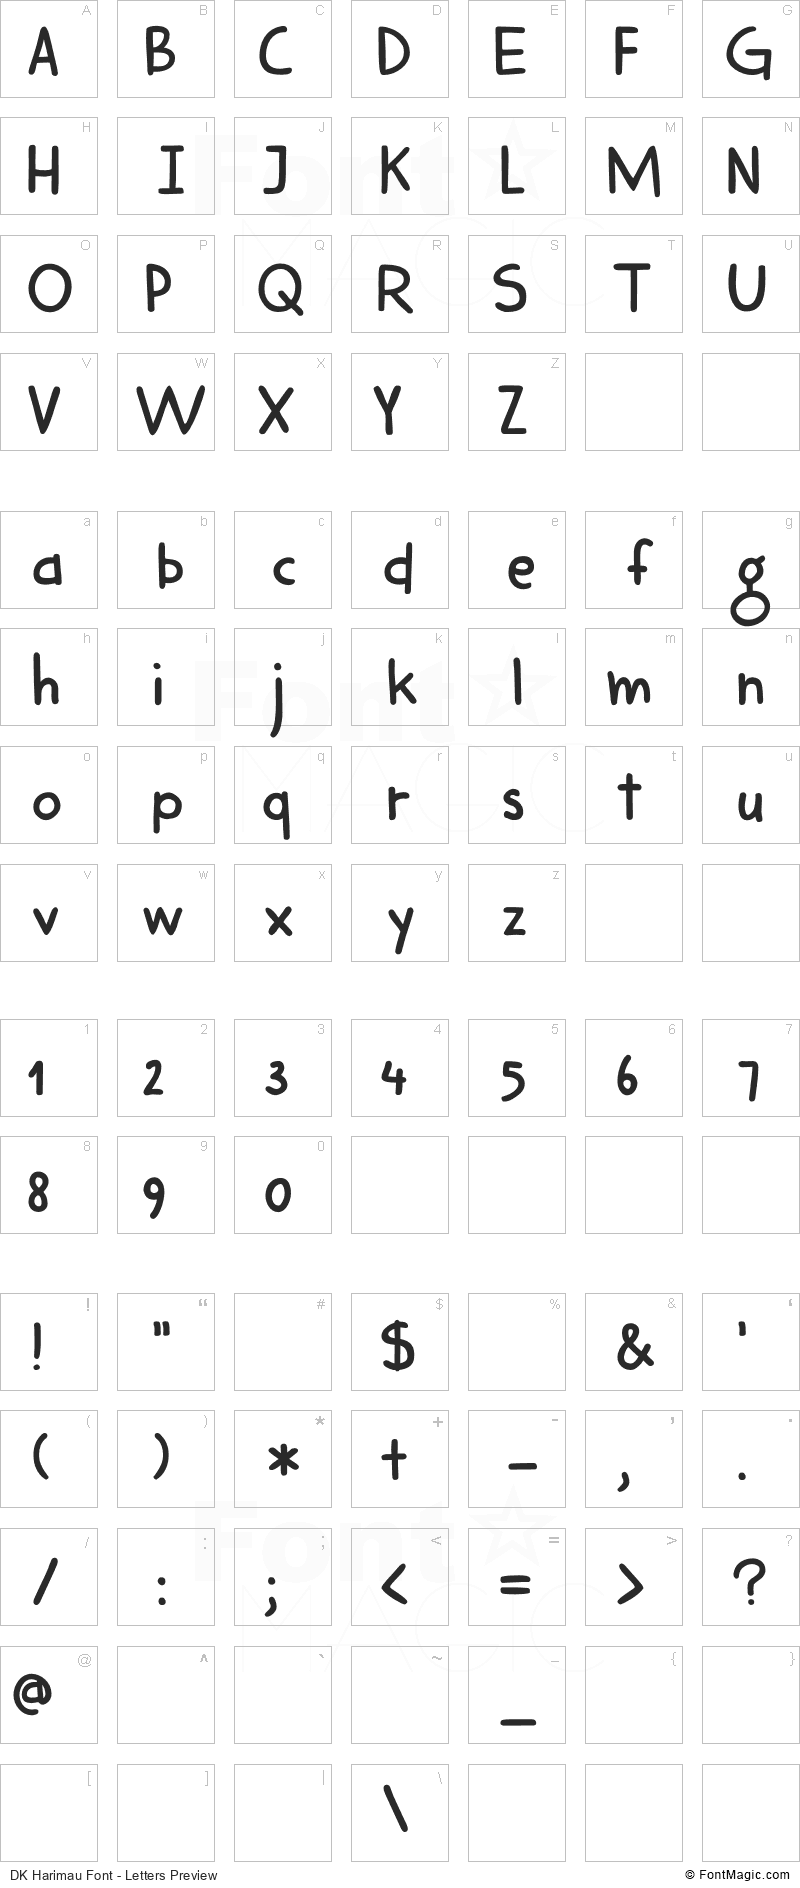 DK Harimau Font - All Latters Preview Chart